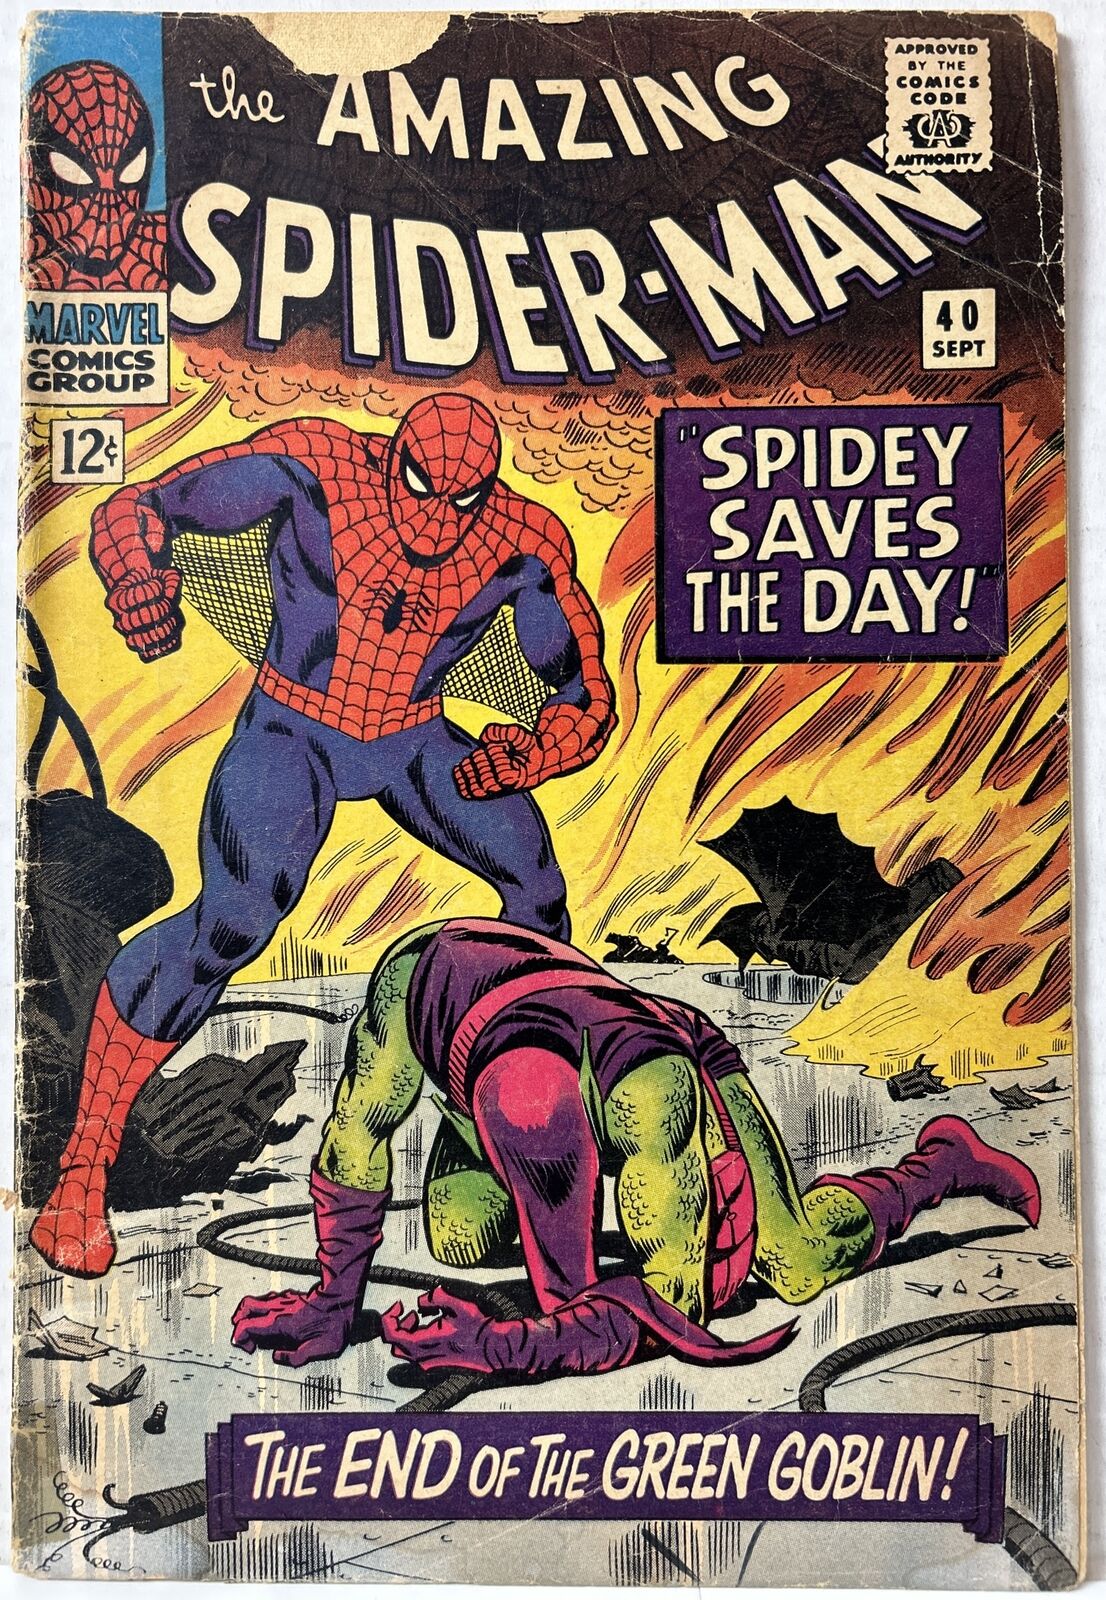 Amazing Spider-Man #40 1966 Silver Age Marvel Comics Green Goblin Revealed